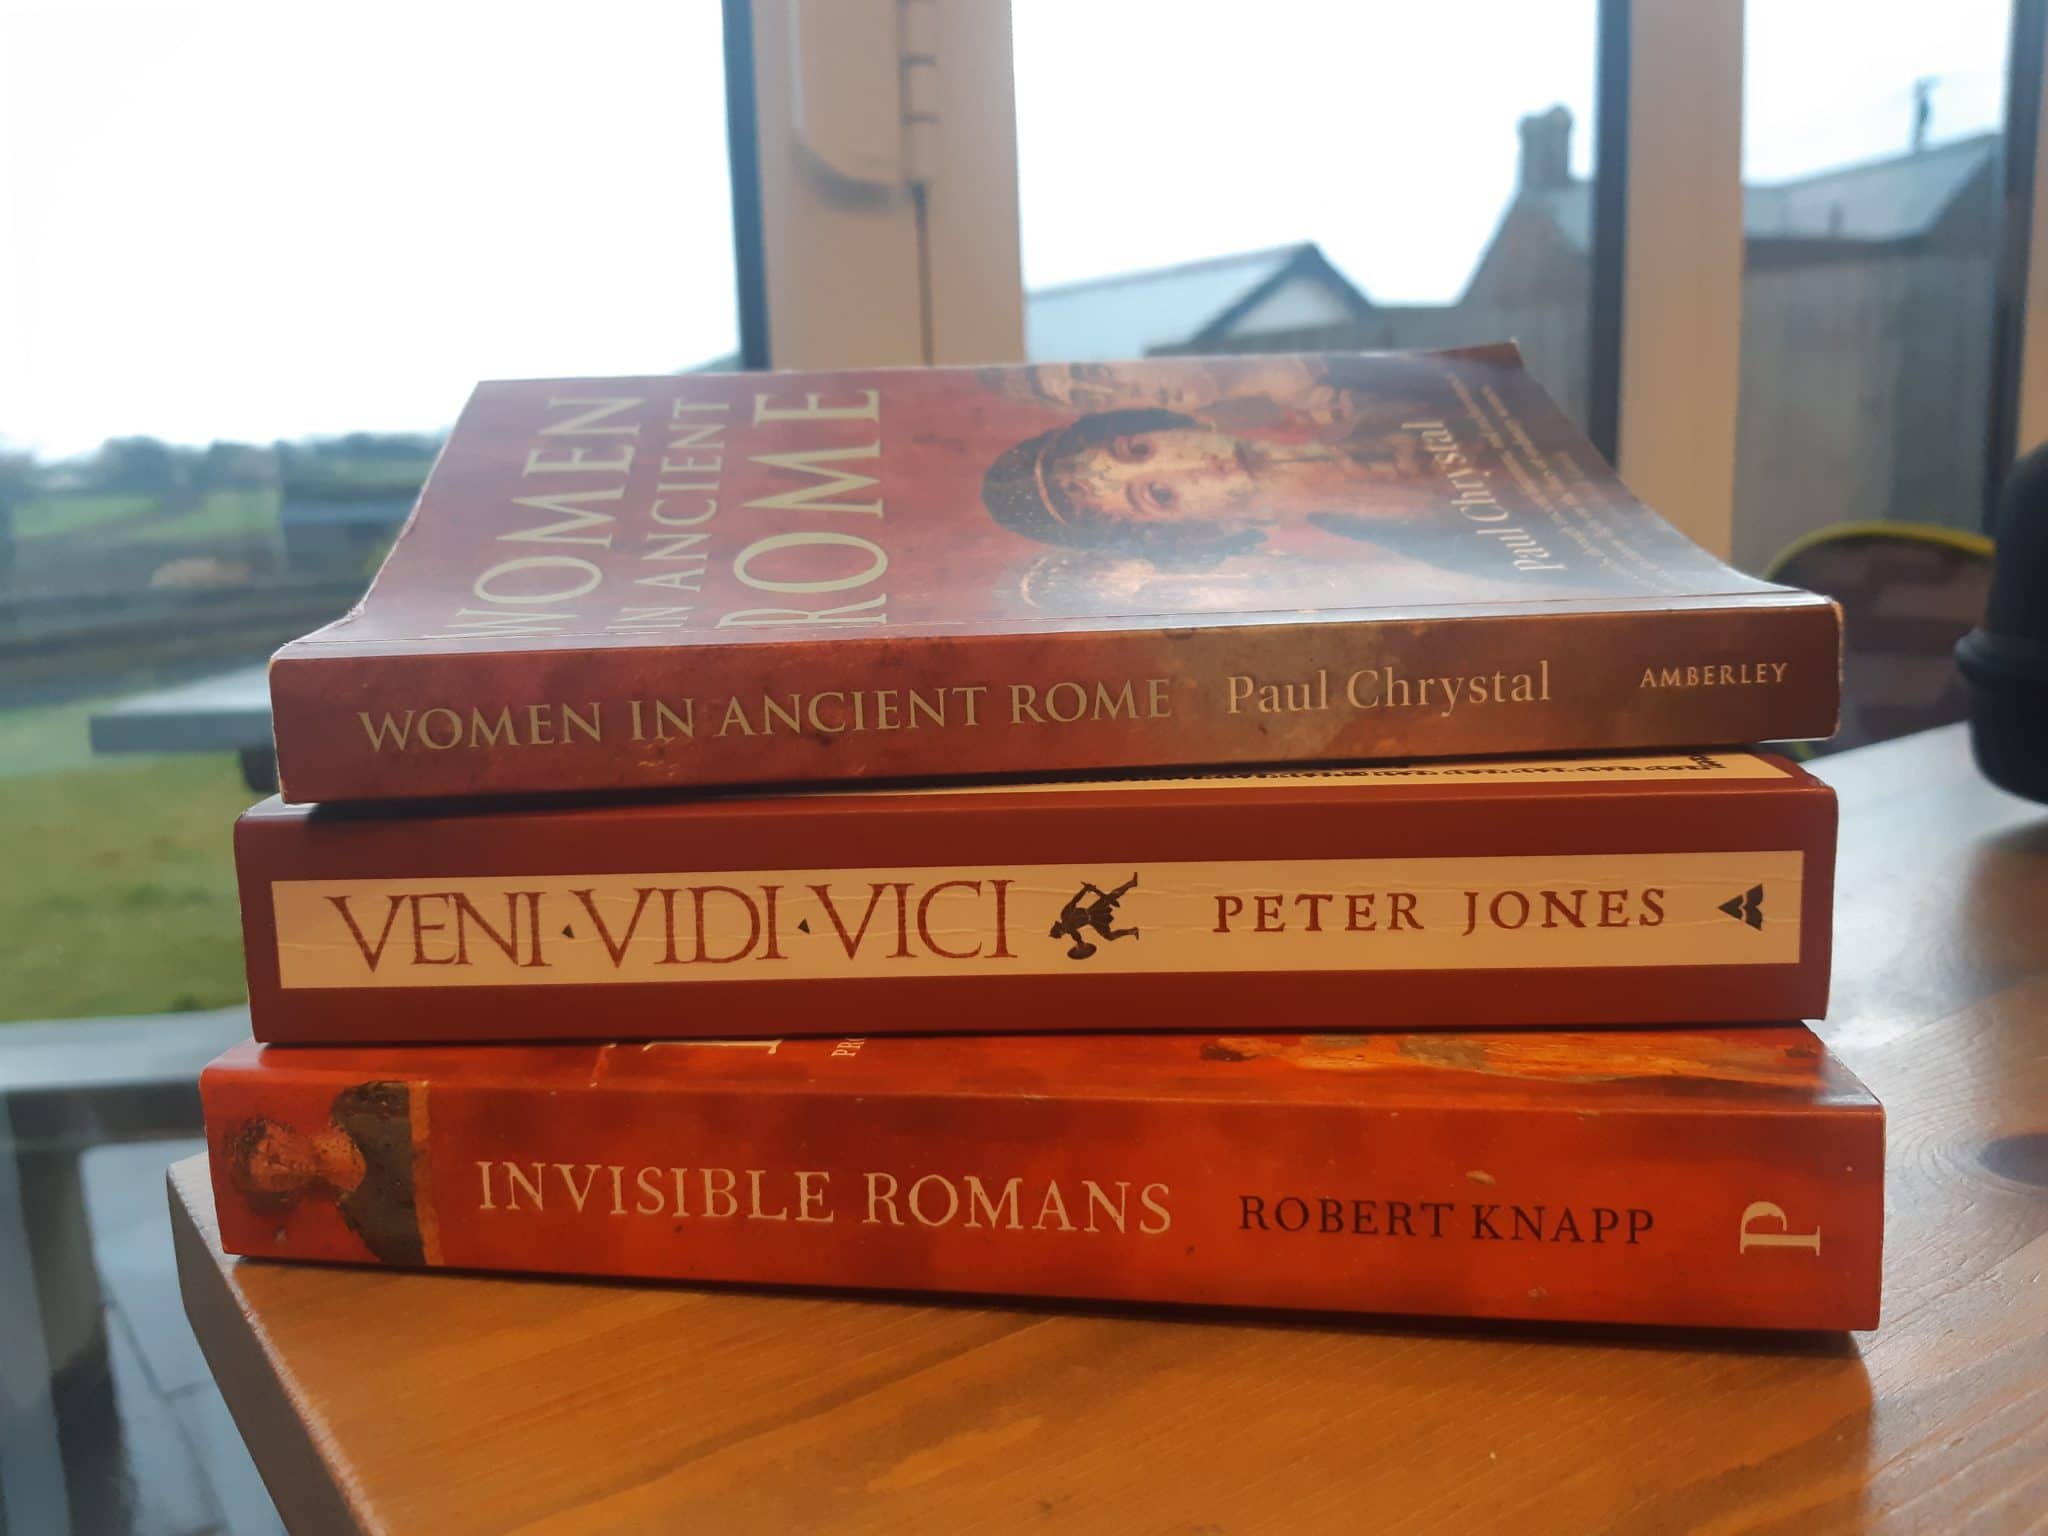 The Best Roman History Books: 9 Favorite Reads on Ancient Rome - 20210102 160419 ScaleD